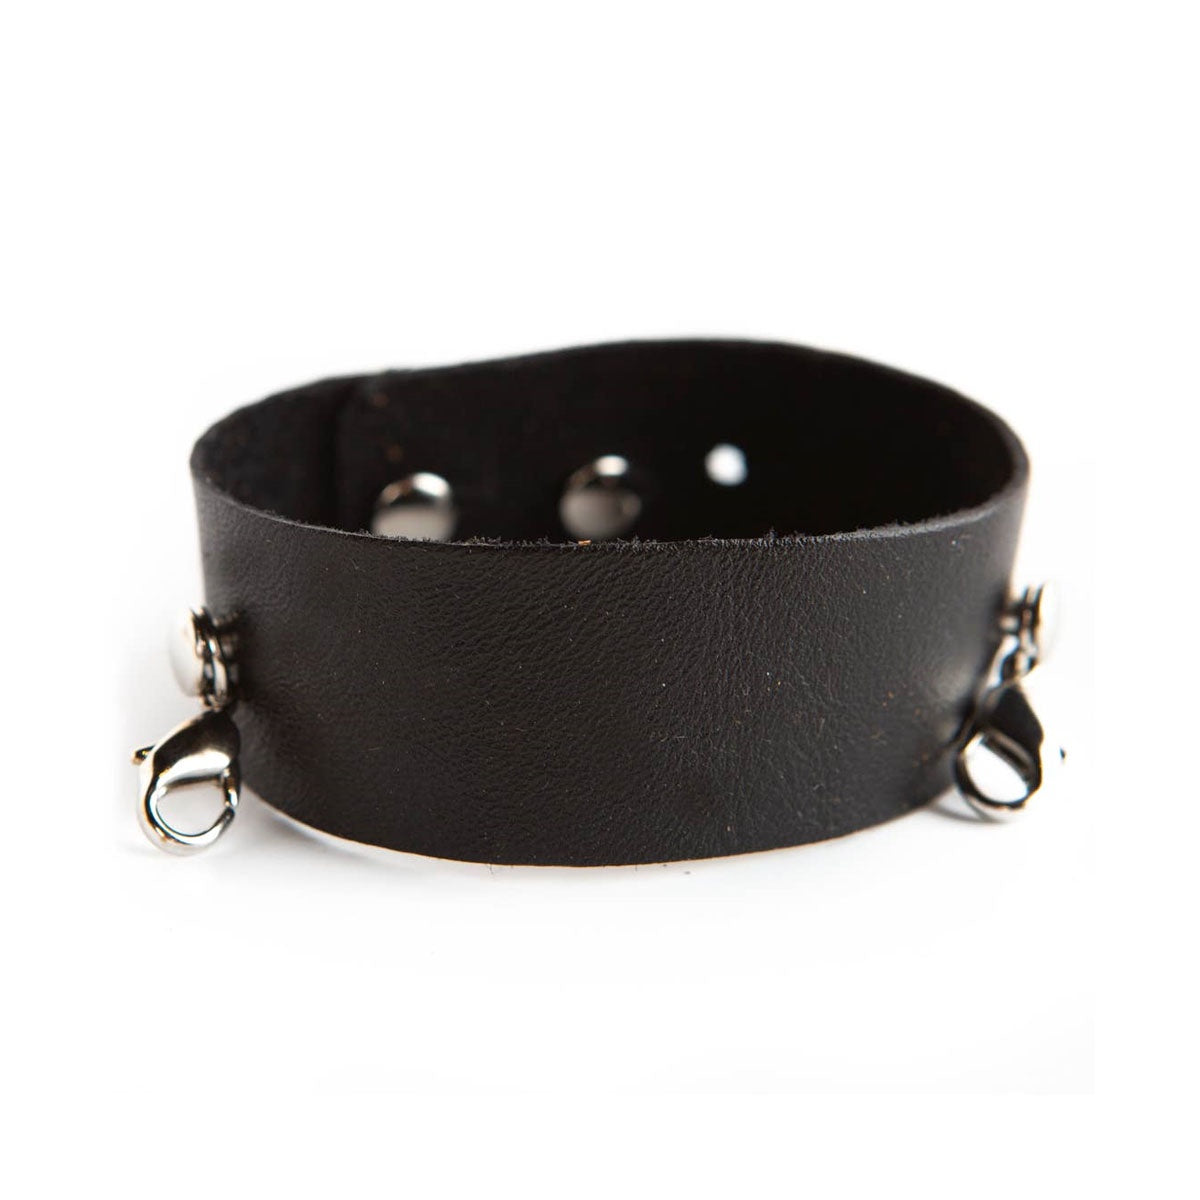 Black thin leather cuff with silver clasps by Lenny & Eva jewelry